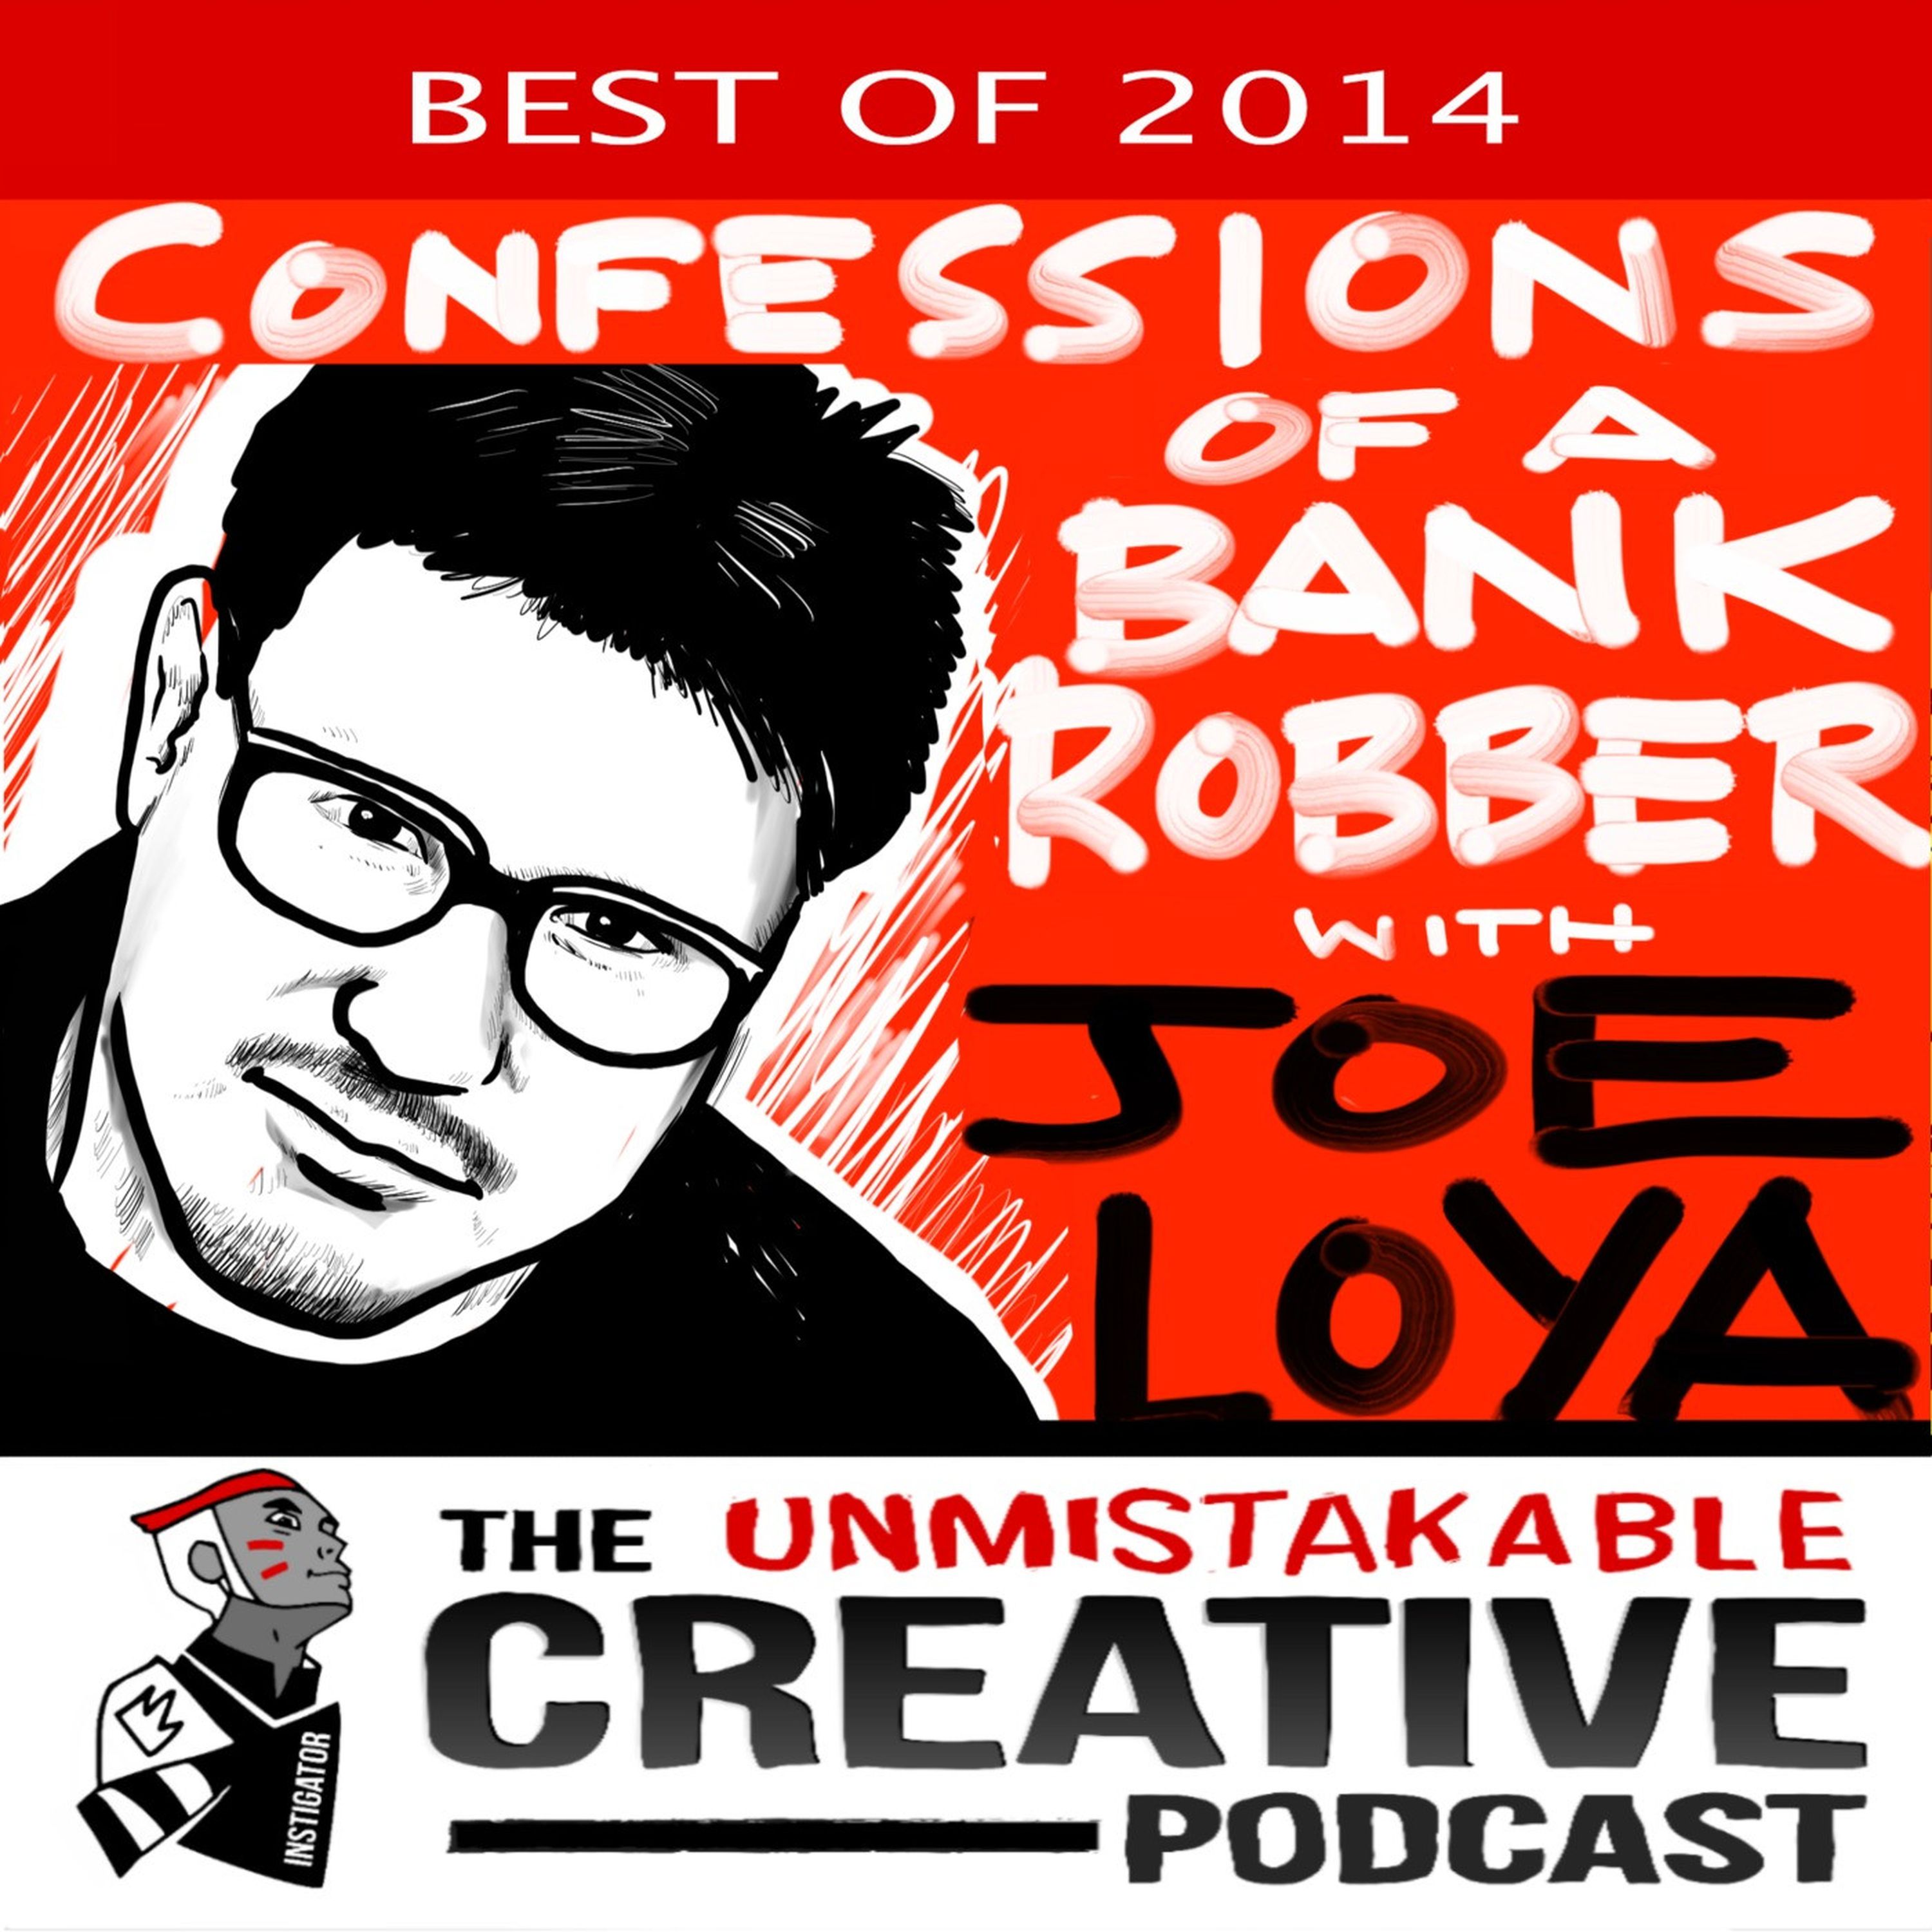 Joe Loya- The Best of 2014: Confessions of a Bank Robber